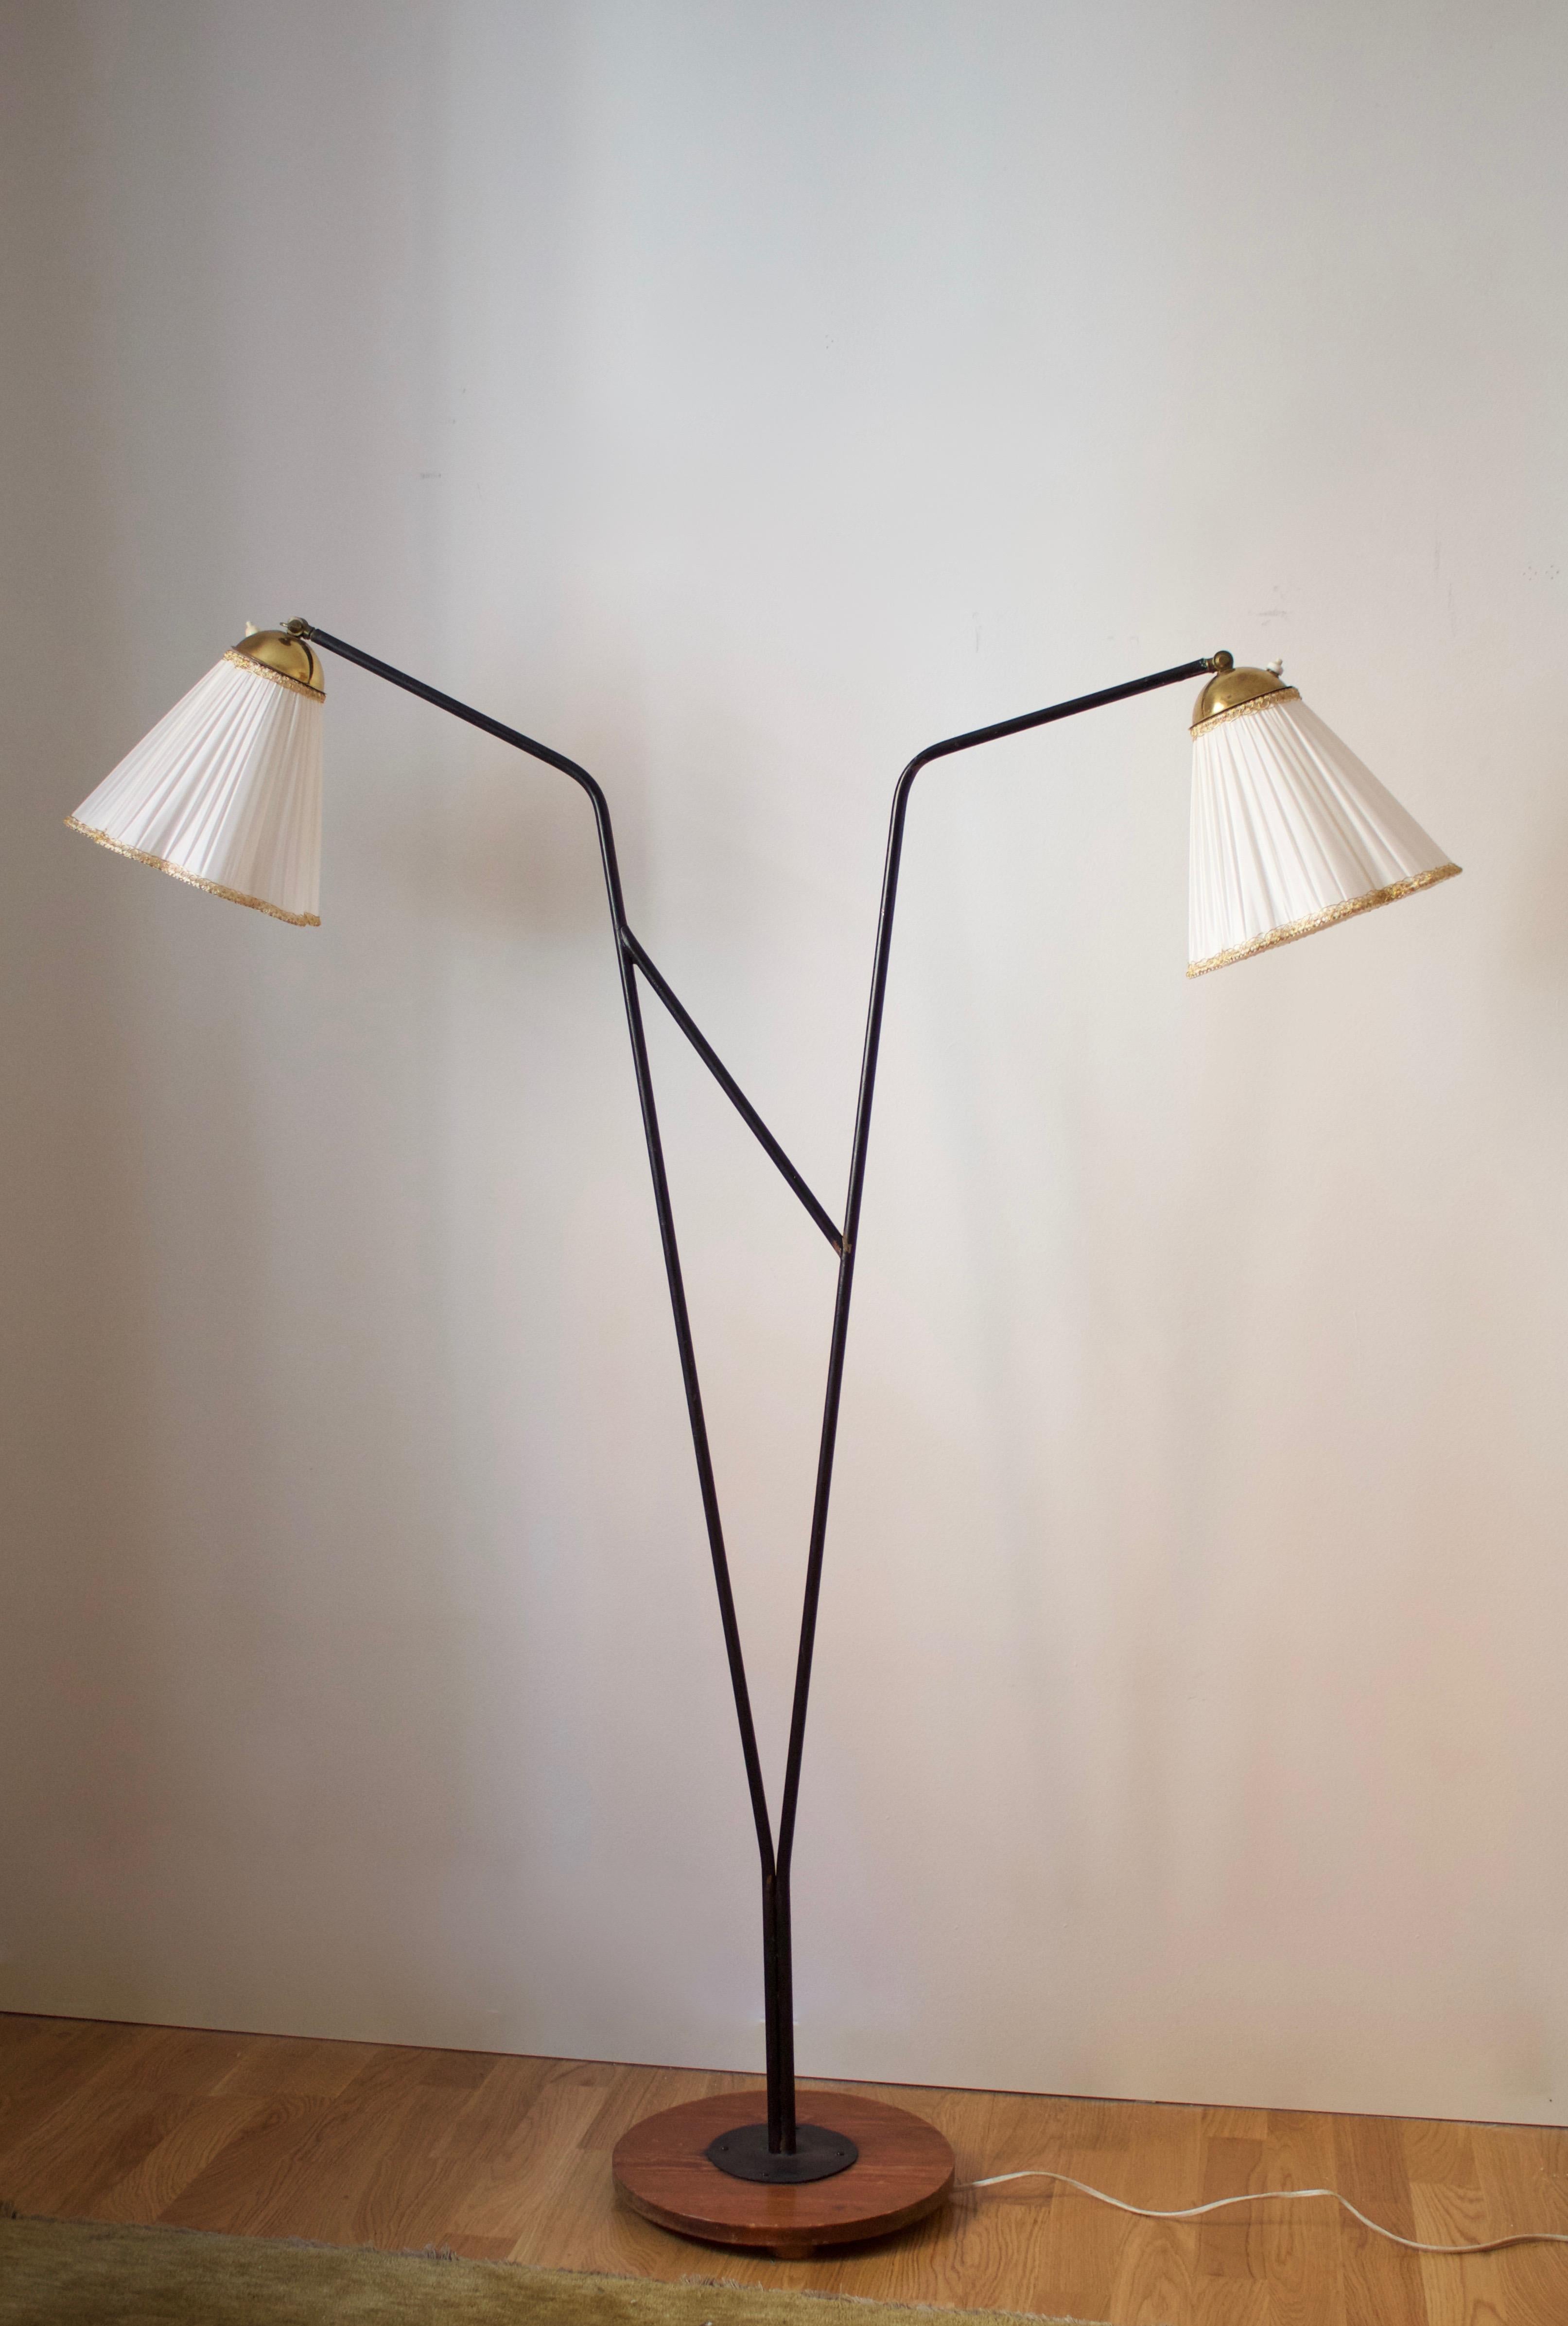 A two-armed floor lamp. In lacquered metal, brass, fabric, and wood. Brand new lampshades.